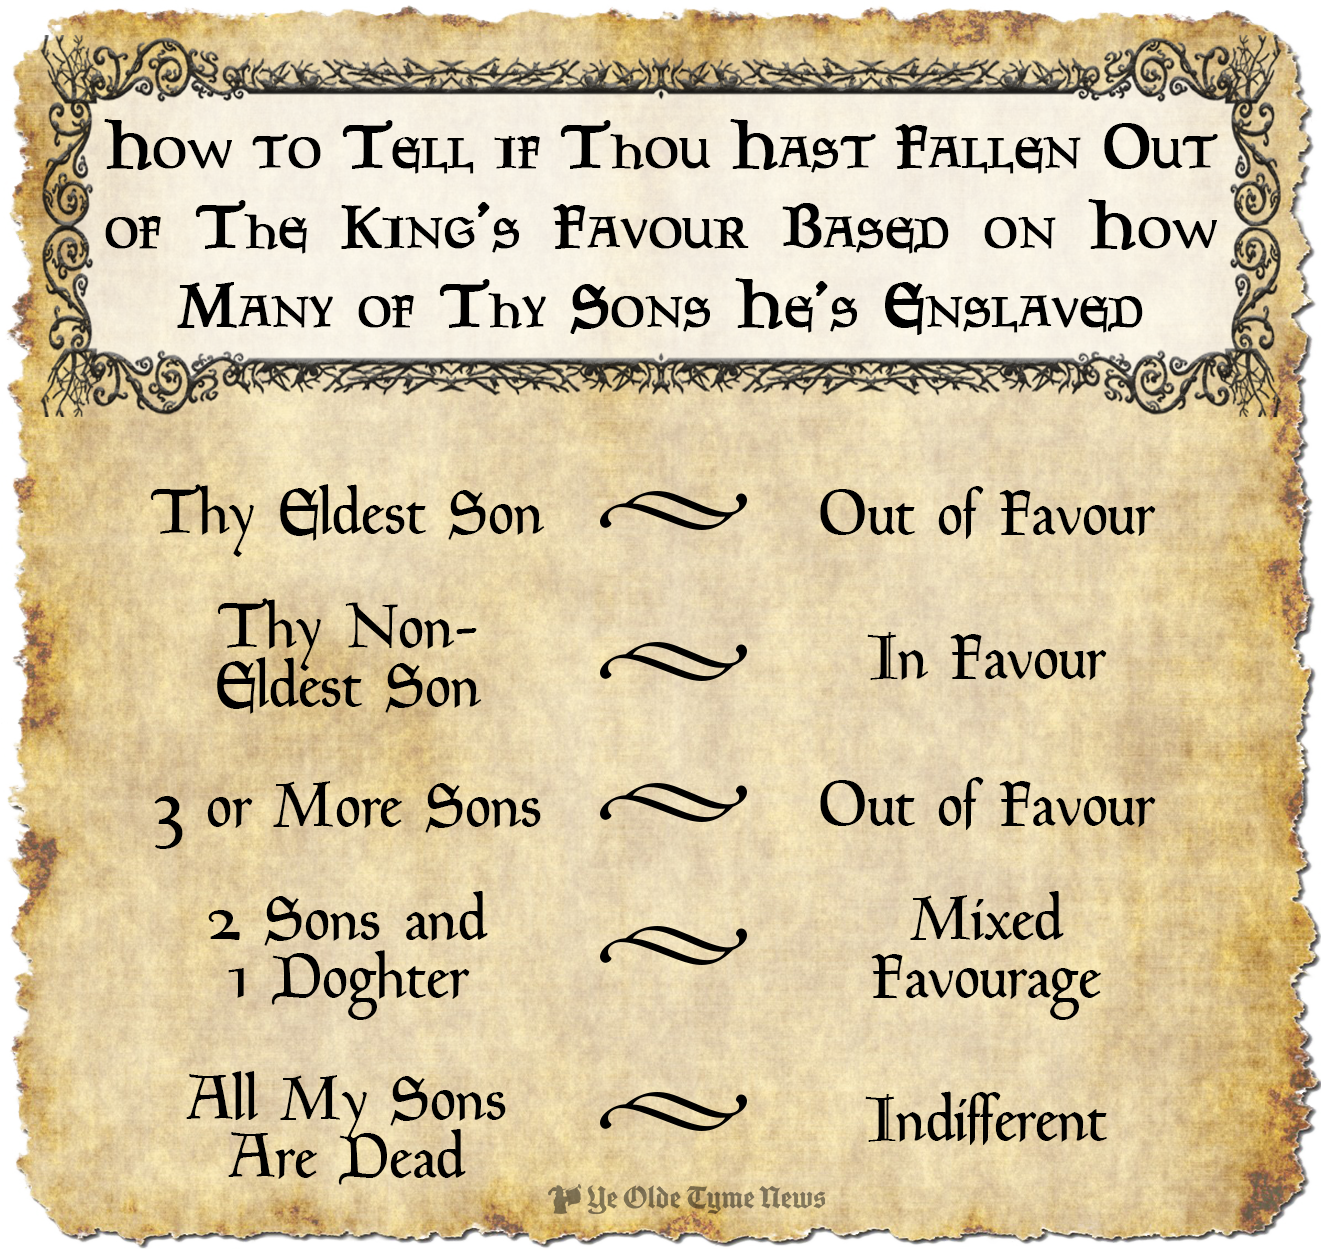 how to tell if thou hast fallen out of the king's favour chart